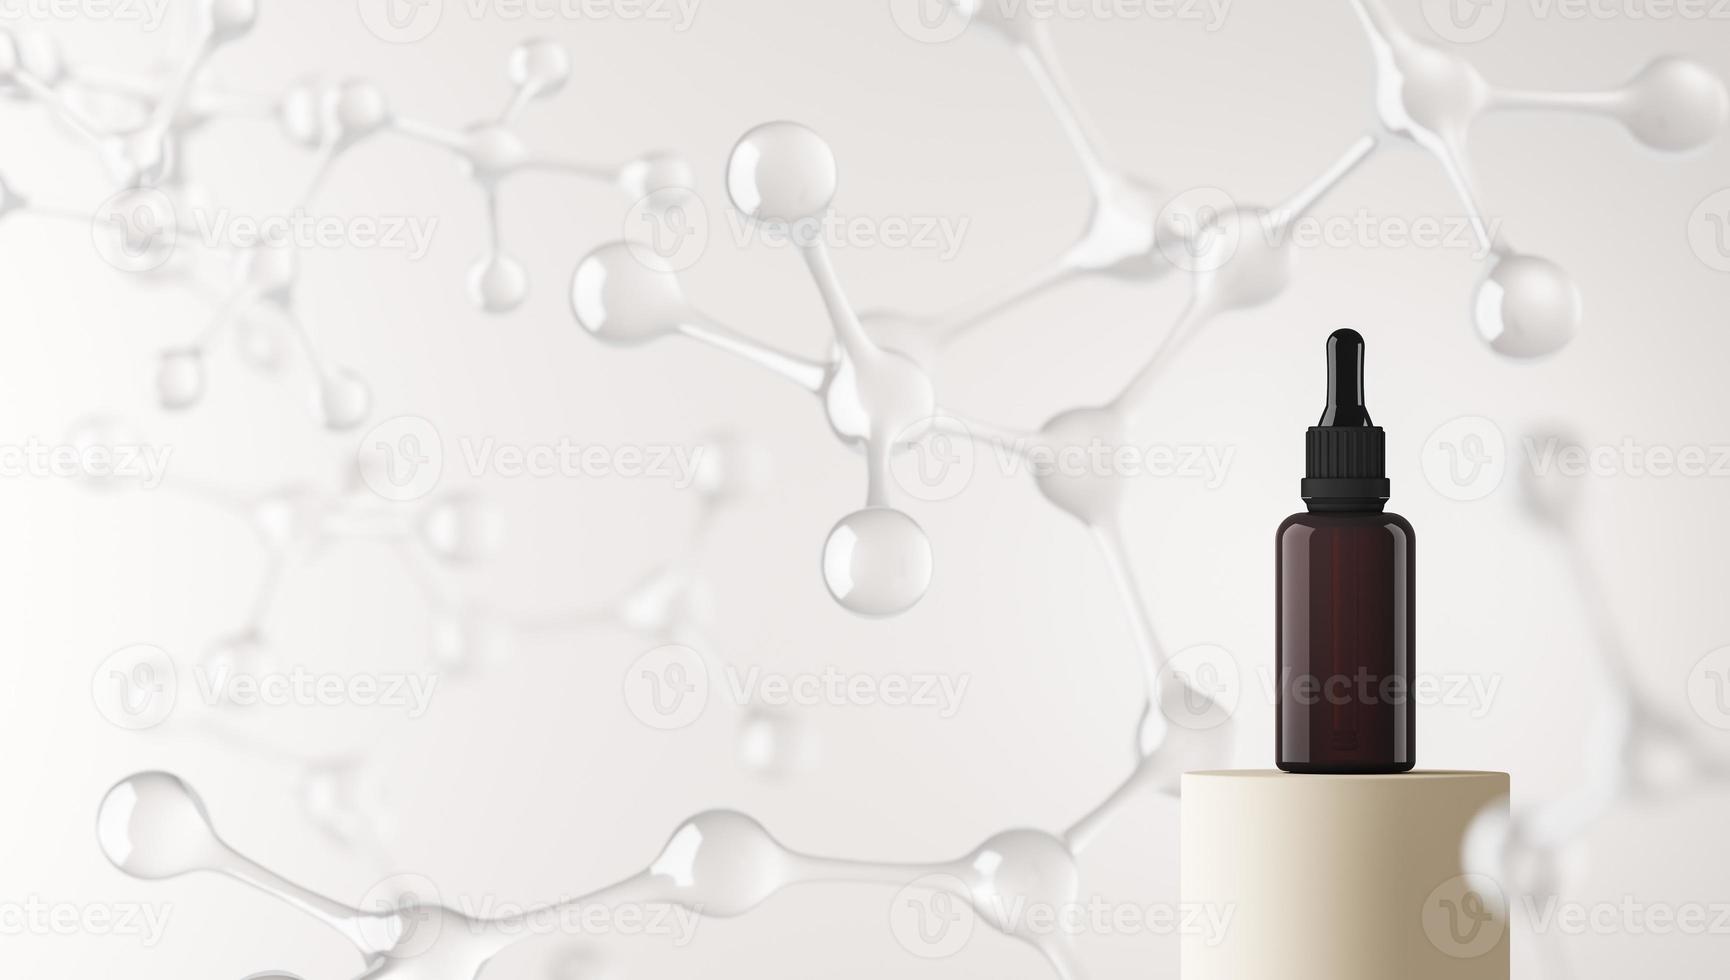 Mockup dropper bottle on platform and blur molecules background, abstract background for cosmetic presentation or branding. 3d rendering photo